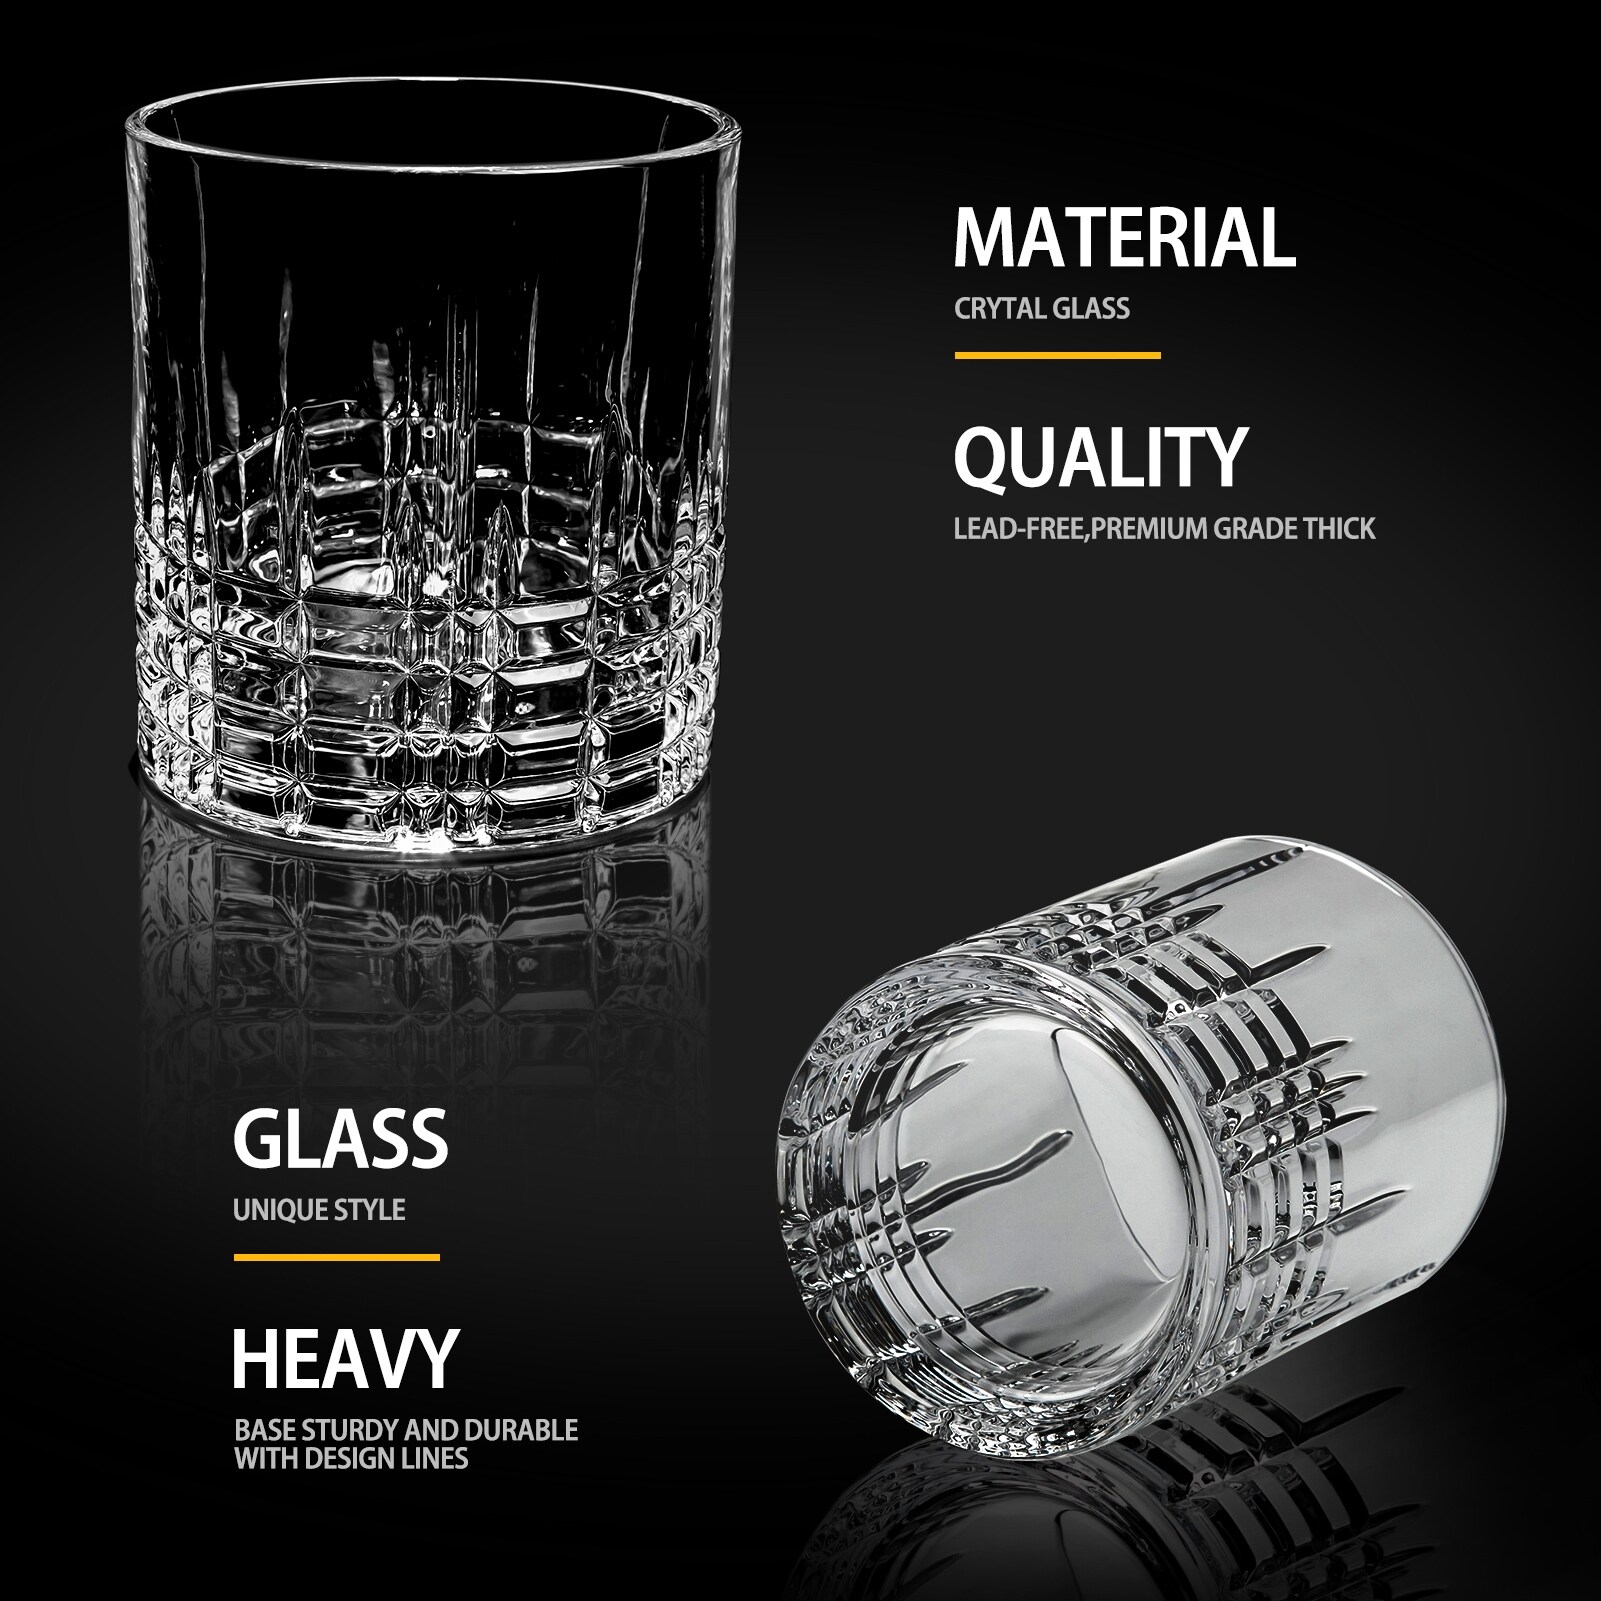 https://ak1.ostkcdn.com/images/products/is/images/direct/9a4604a9e9ba32ff710a1898cbfdc04a0d7f462d/10-Oz-Whiskey-Glasses%2C-Set-of-4.jpg